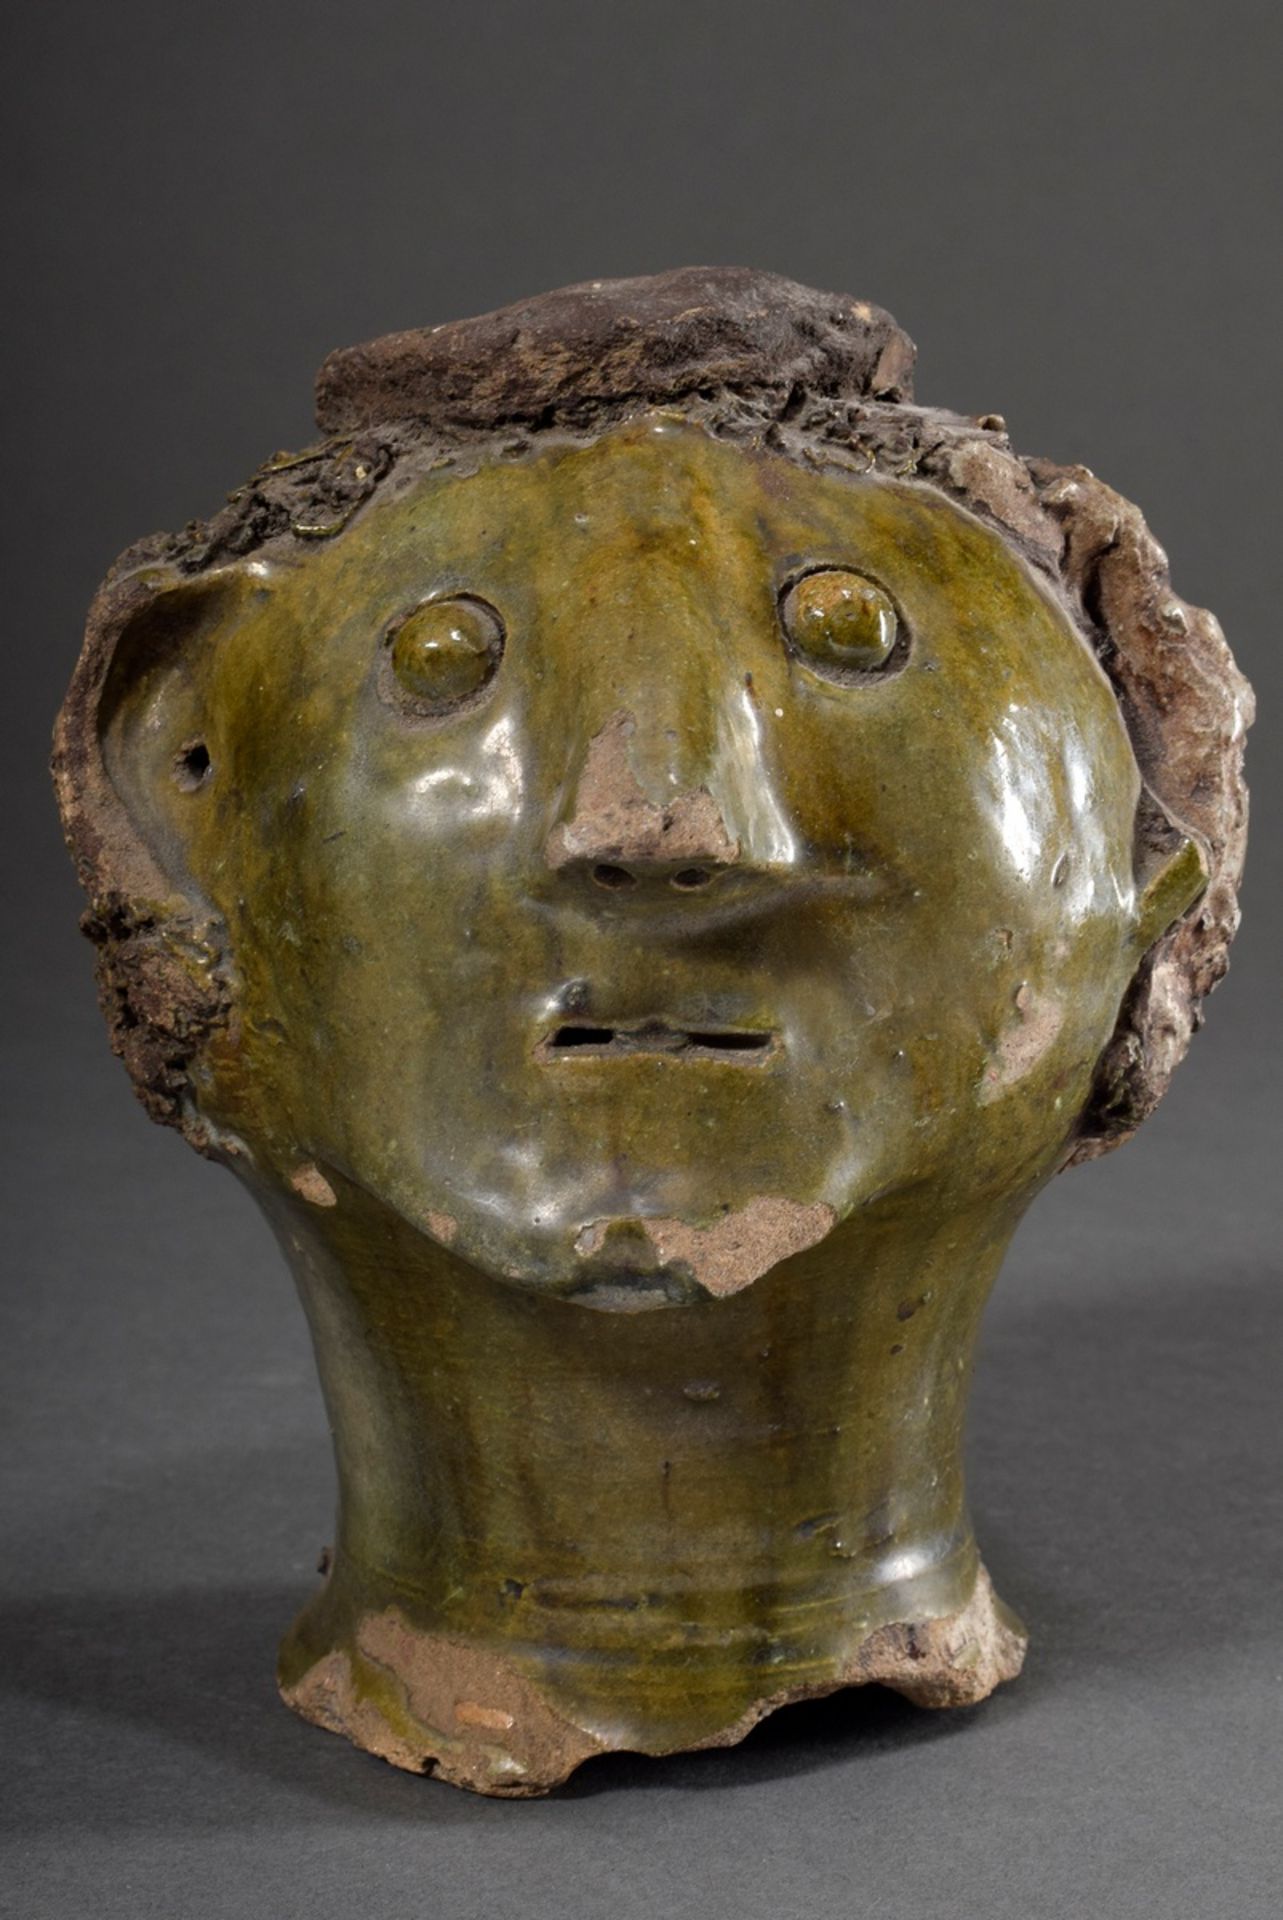 Fragment of a clay sculpture "Male head with curls and hat", sphere of Gerhard Marcks (1889-1981), 